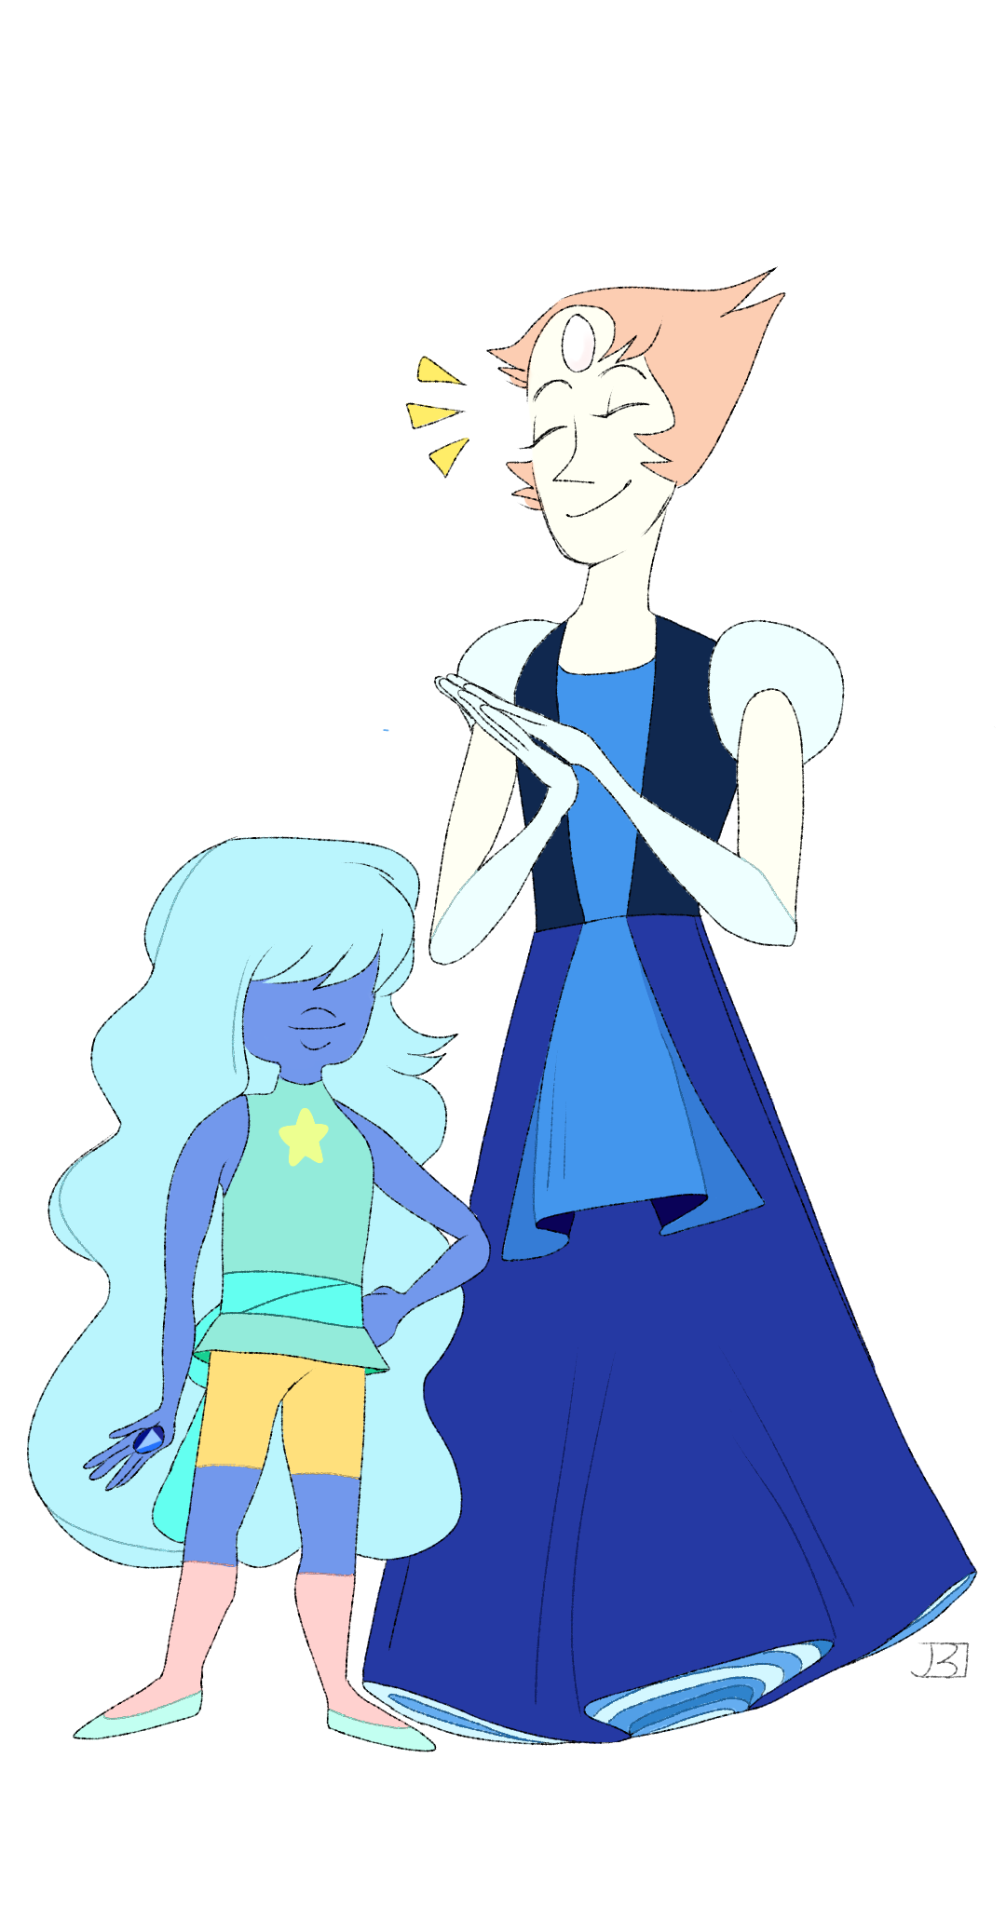 pearl and sapphire outfit swap! my two favourite gems hehe